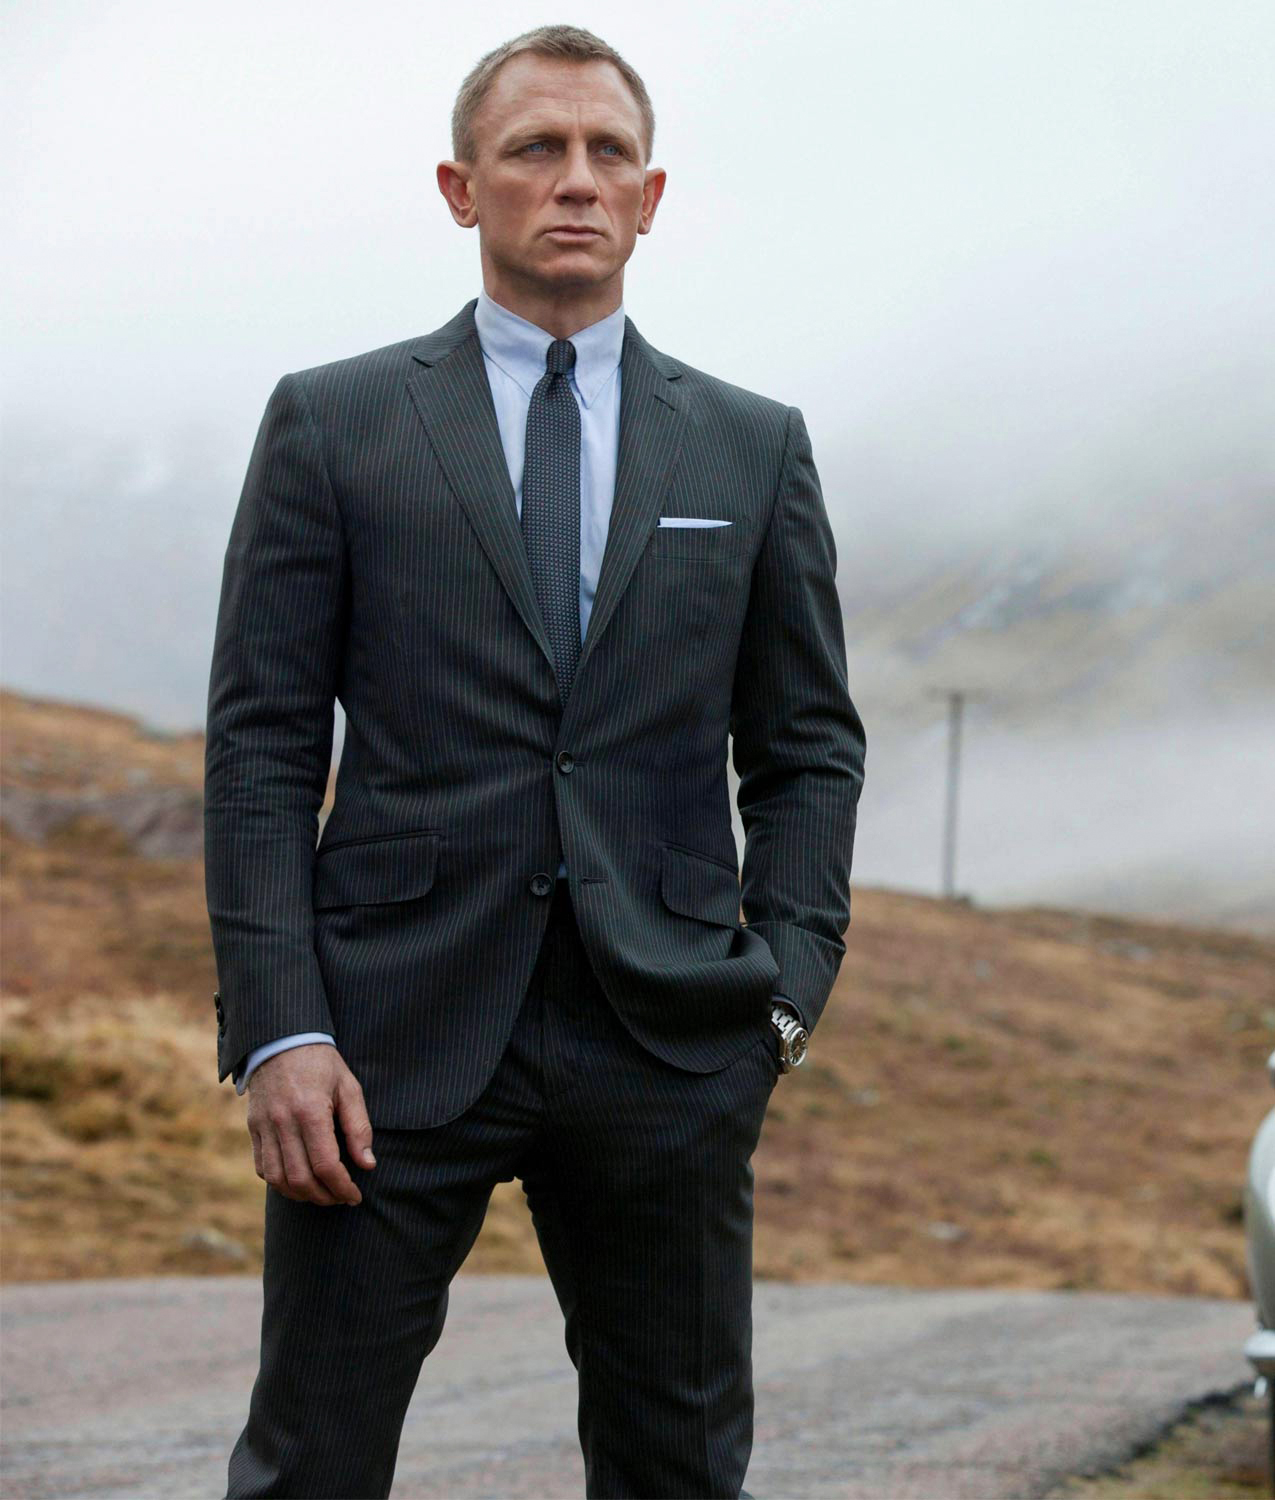 James Bond wears charcoal grey suit with white dress shirt and dark grey tie